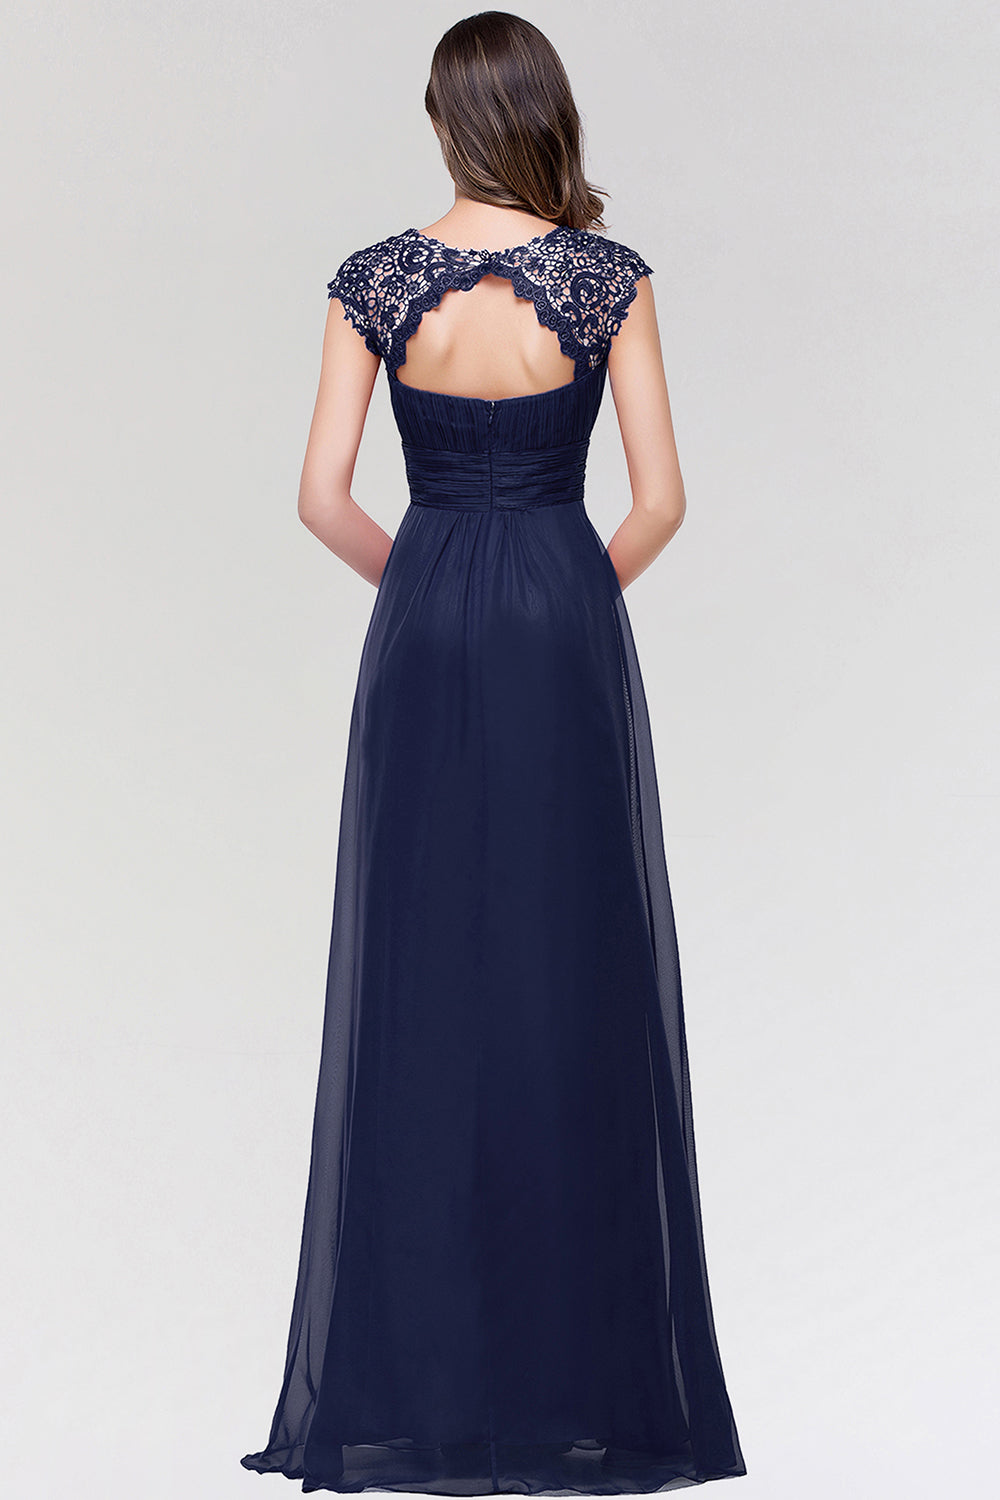 Load image into Gallery viewer, Elegant Chiffon Pleated Navy Lace Bridesmaid Dress with Keyhole Back-27dress
